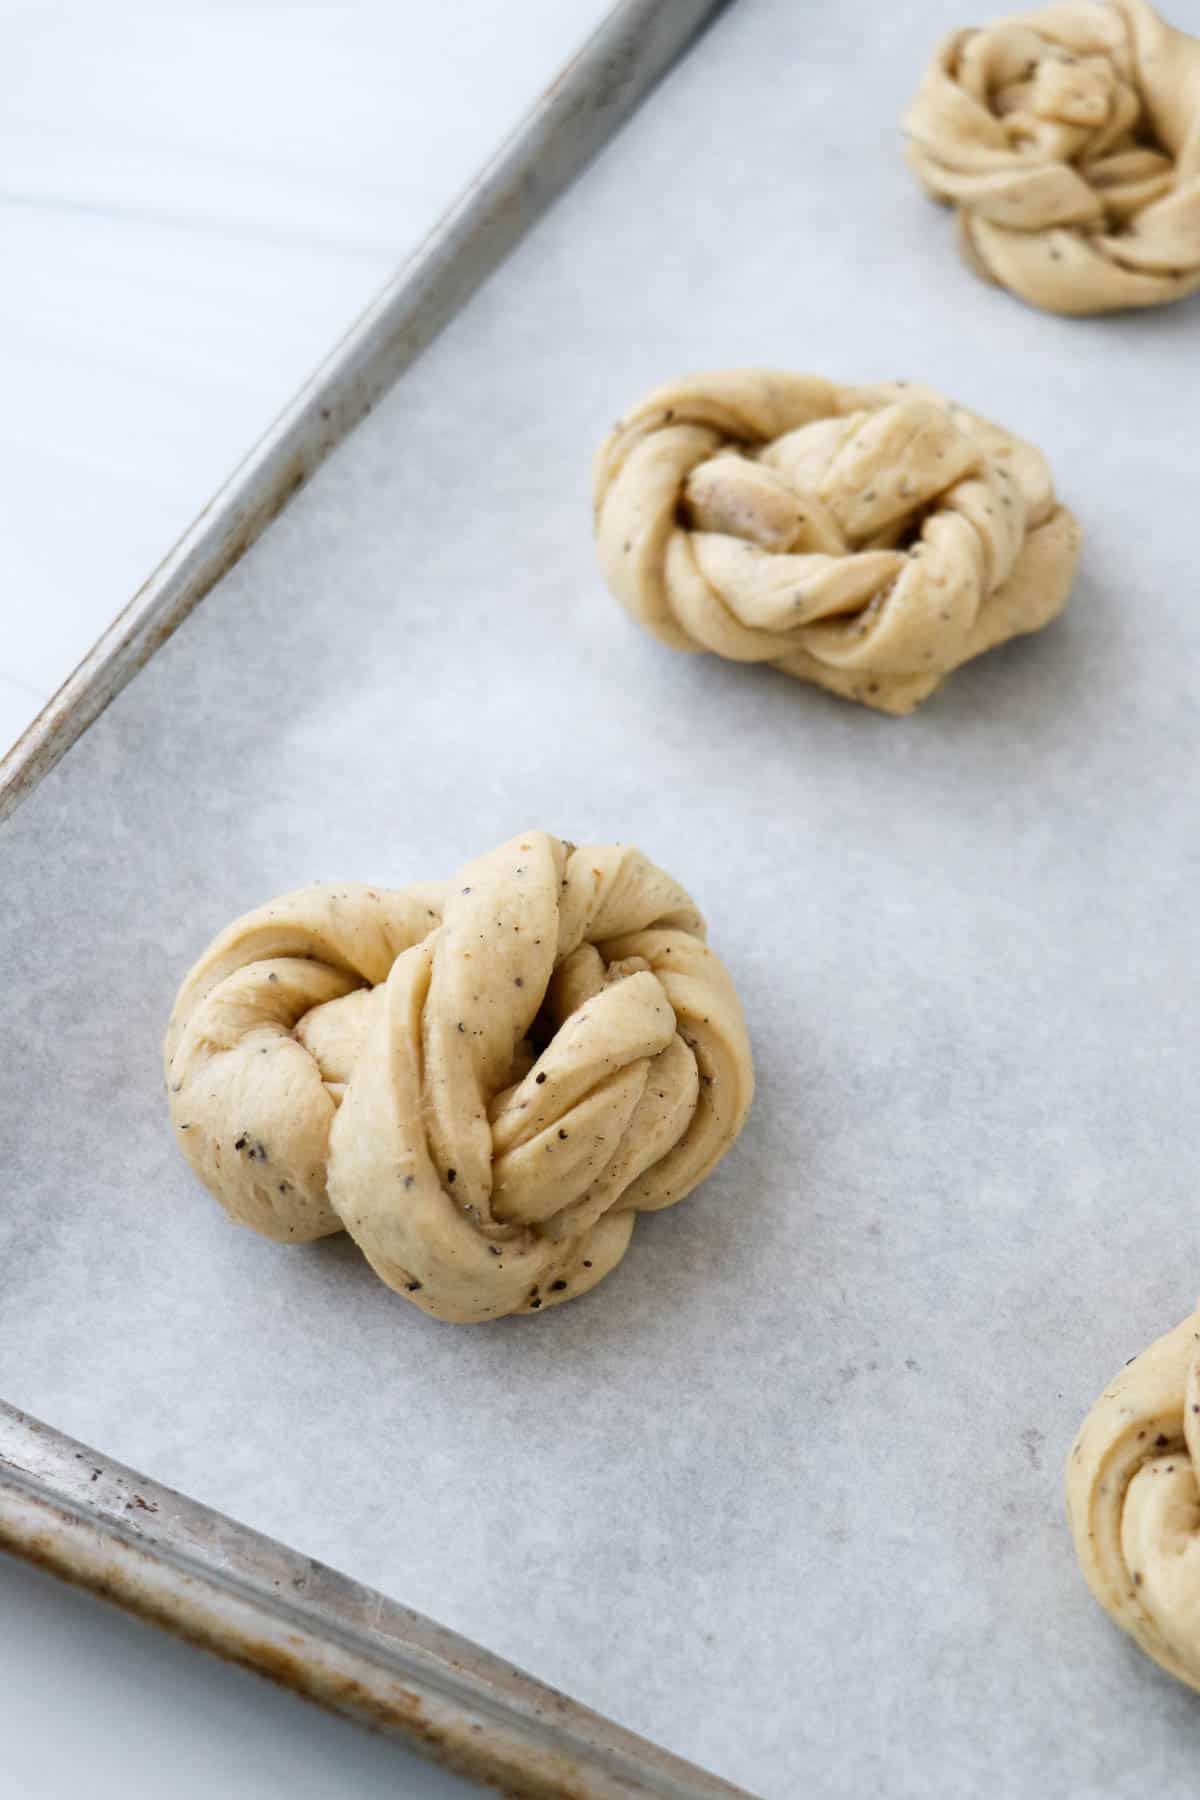 Unbaked cardamom buns on a baking sheet.